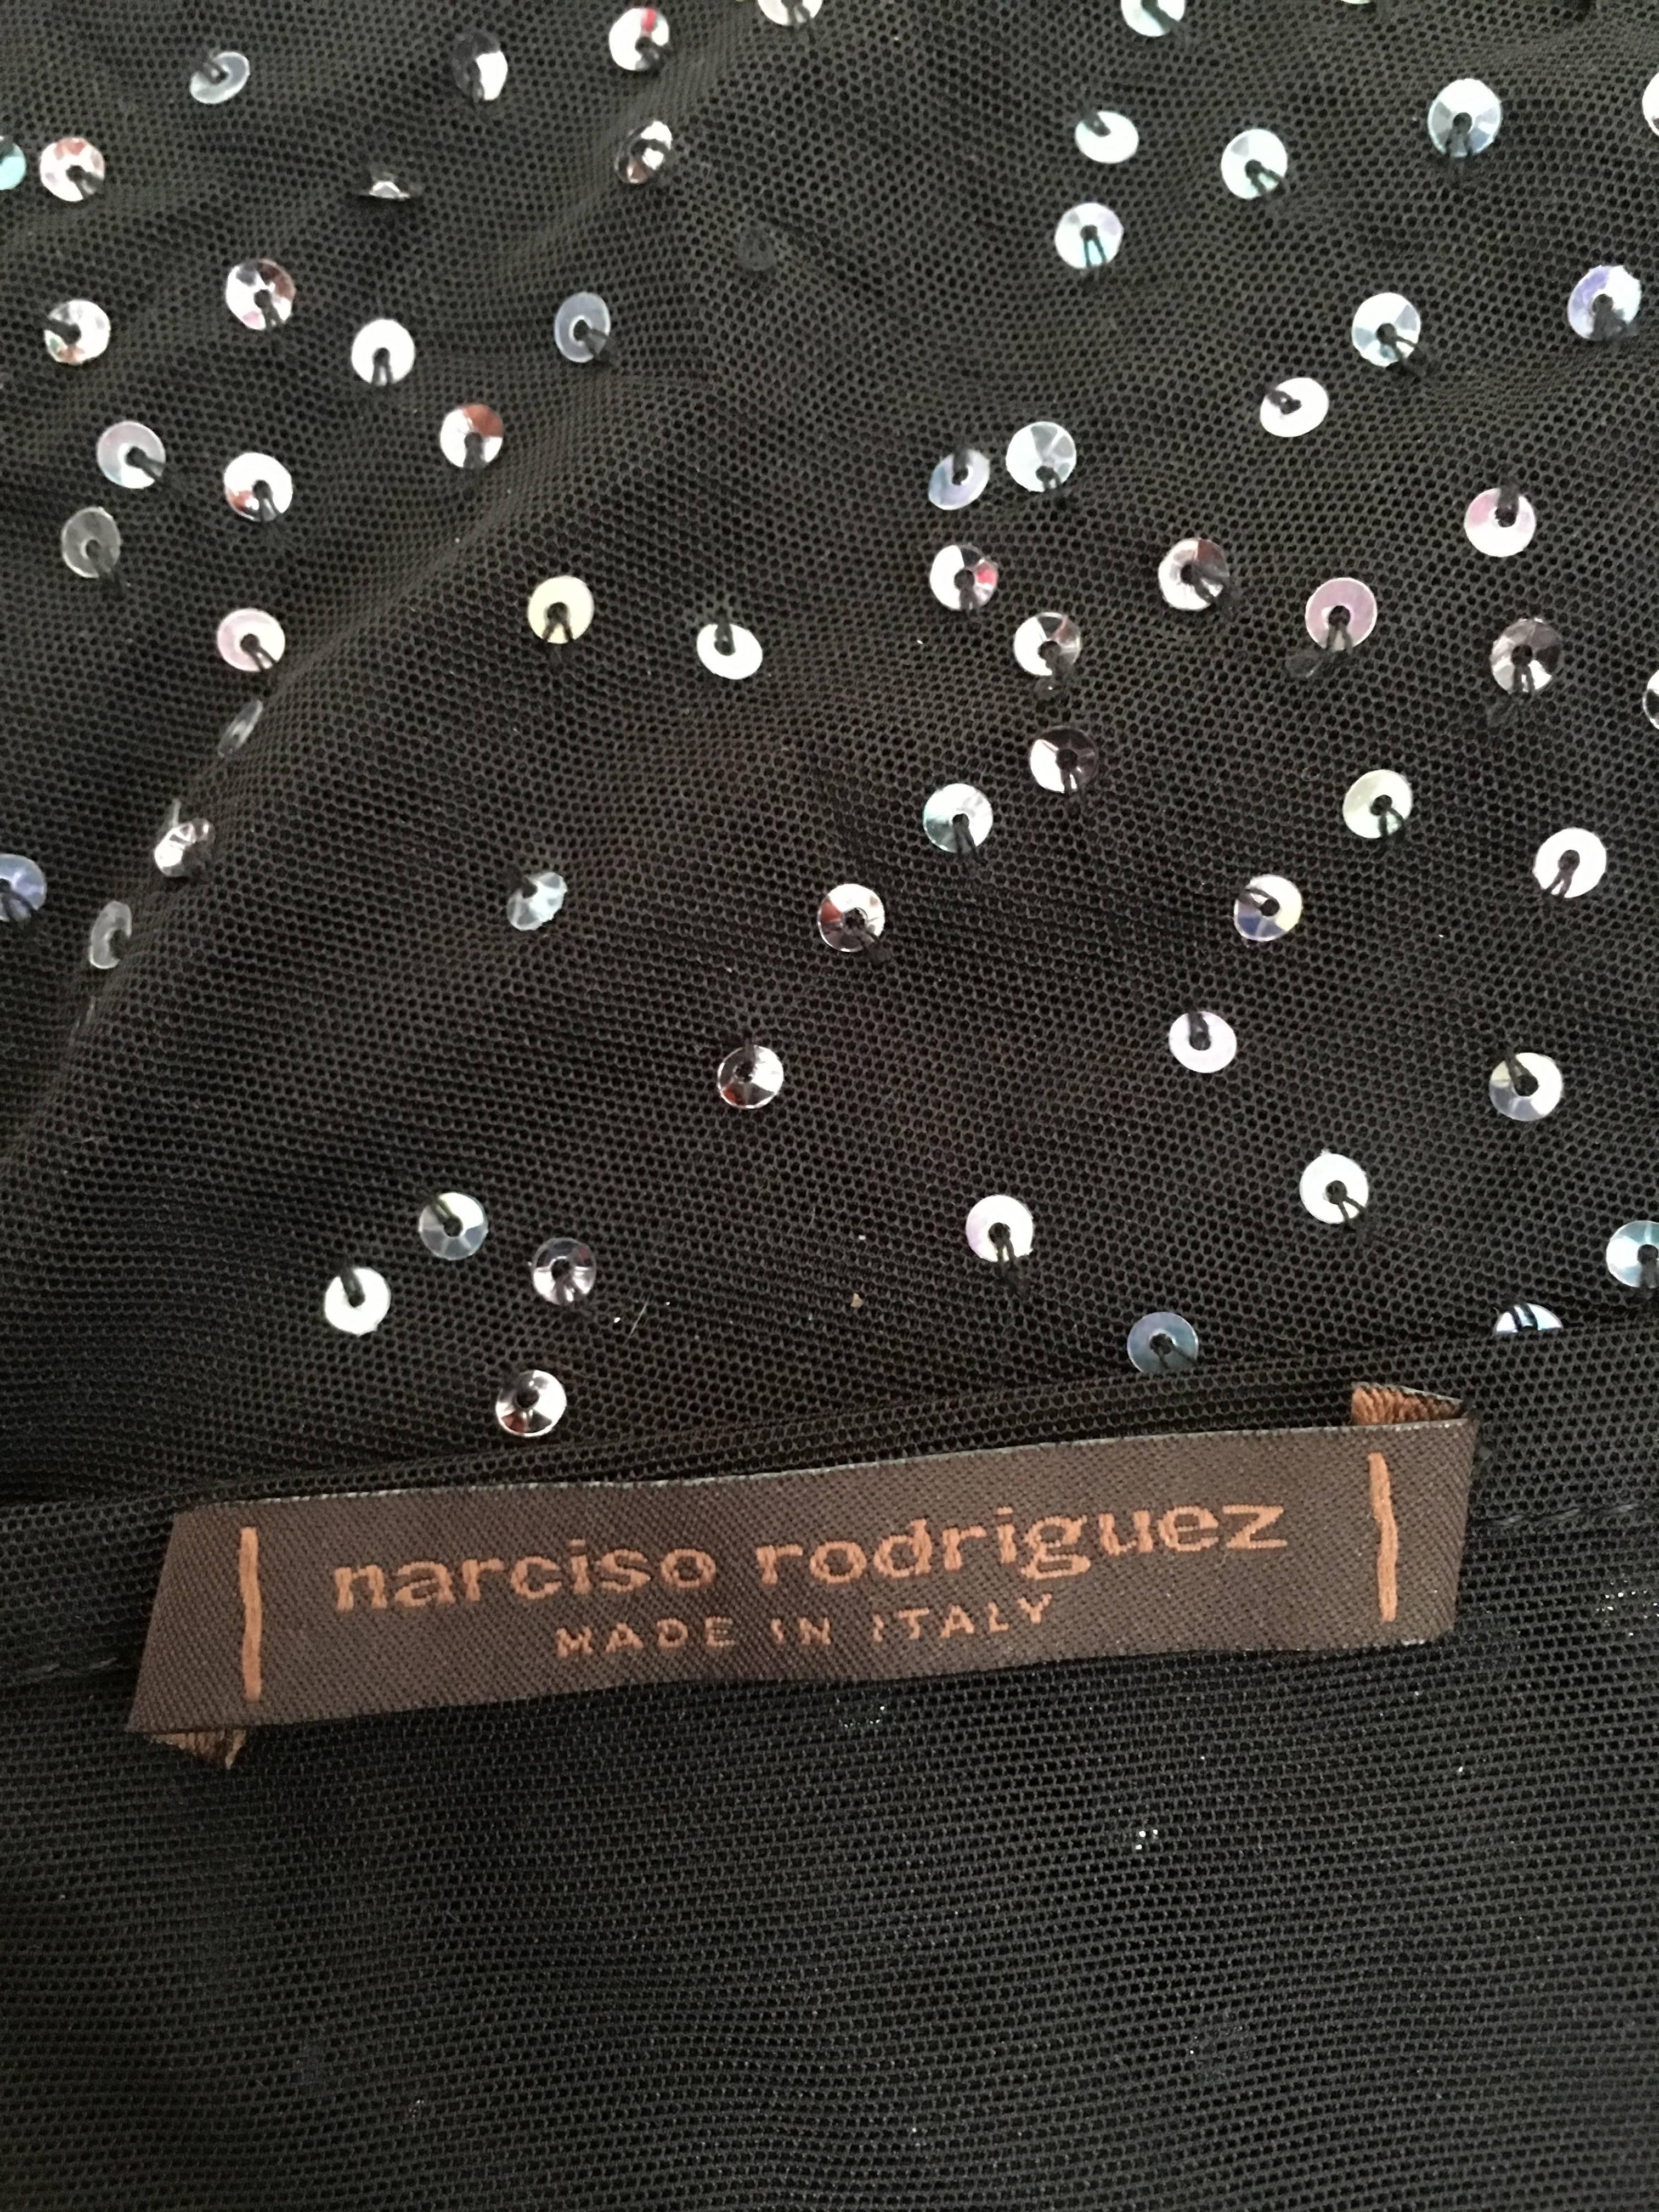 Narciso Rodriguez Black Sheer Sleeveless Sequin Top Size 6. Made in Italy. For Sale 6